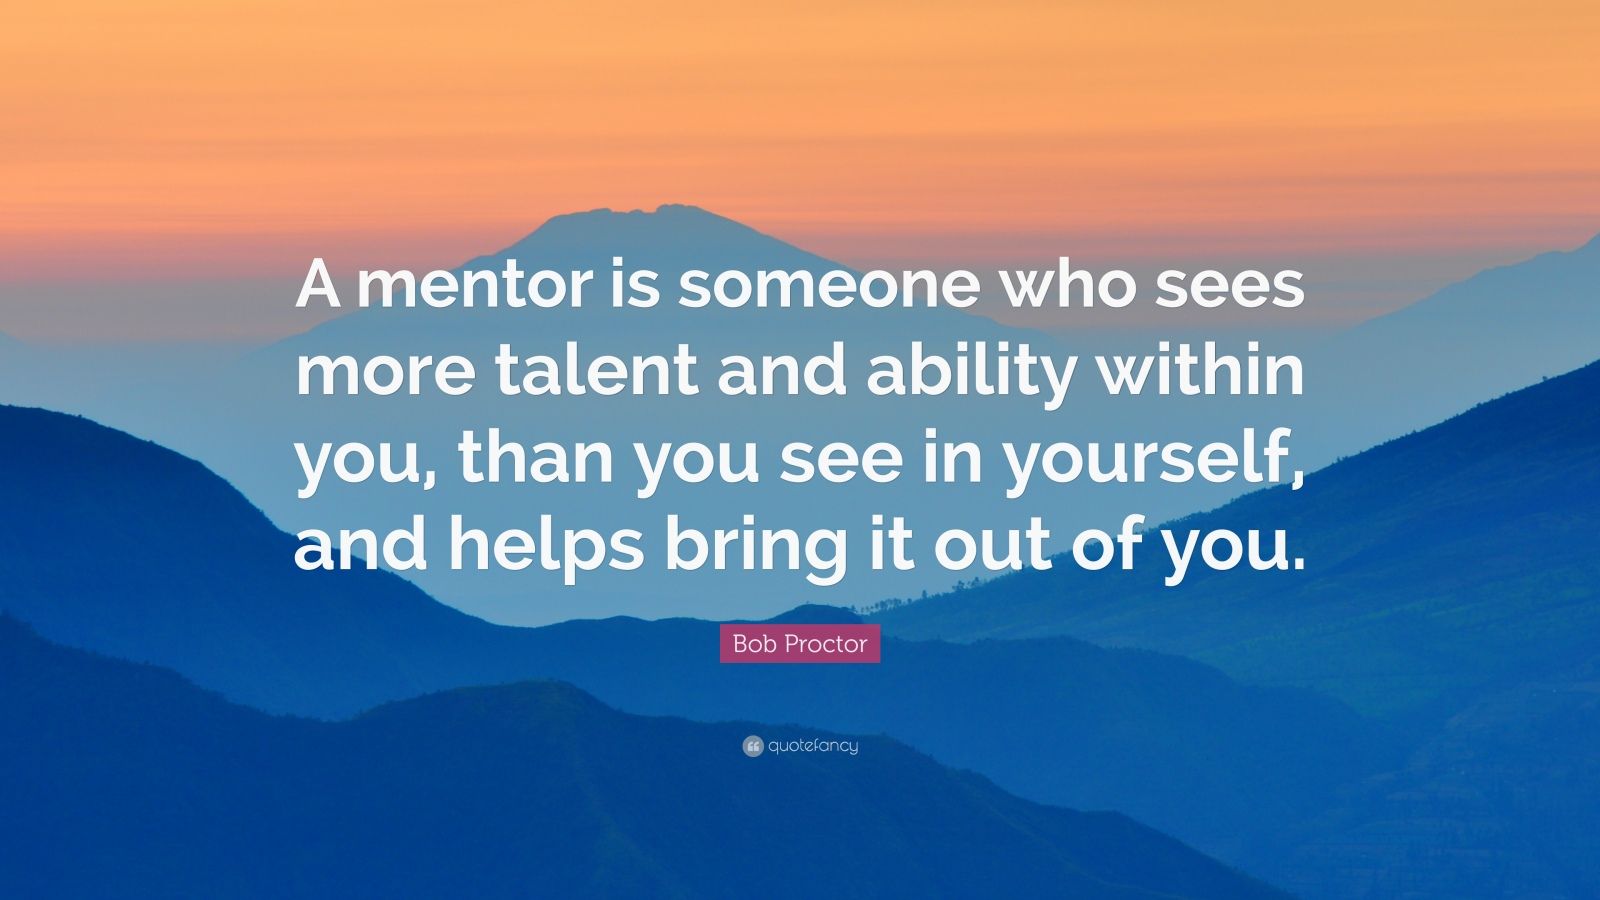 Bob Proctor Quote “A mentor is someone who sees more